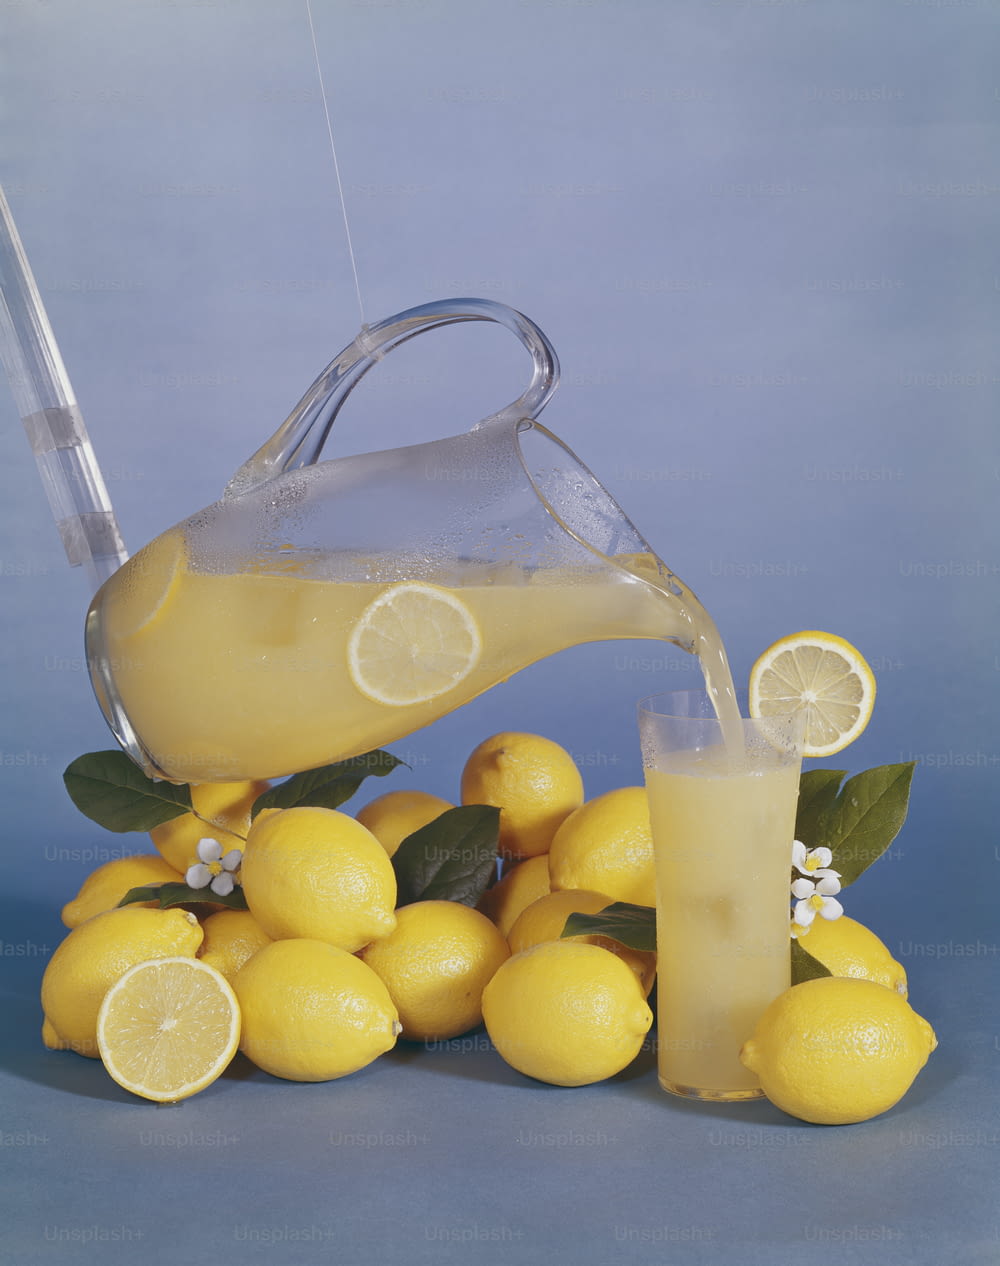 a pitcher of lemonade being poured over a pile of lemons